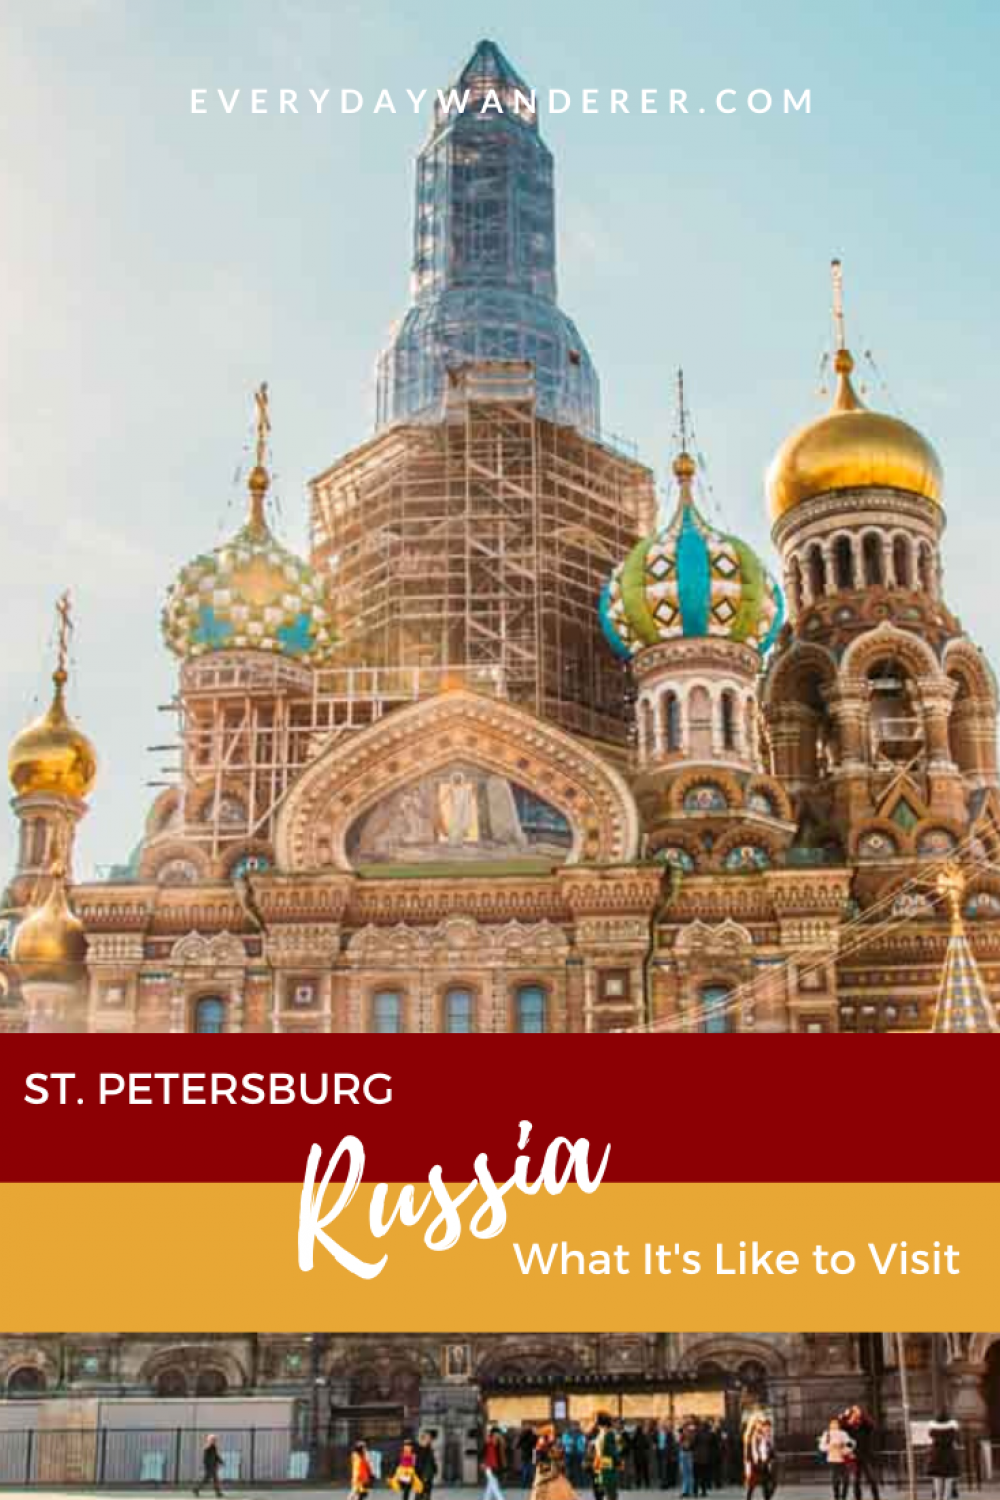 Things to do in St Petersburg Russia including St Petersburg things to do in winter, St Petersburg food, and St Petersburg palaces like the Catherline Palace in Pushkin Russia. Visit St Petersburg Russia on the Baltic Sea #stpetersburg #russia #europe #travel